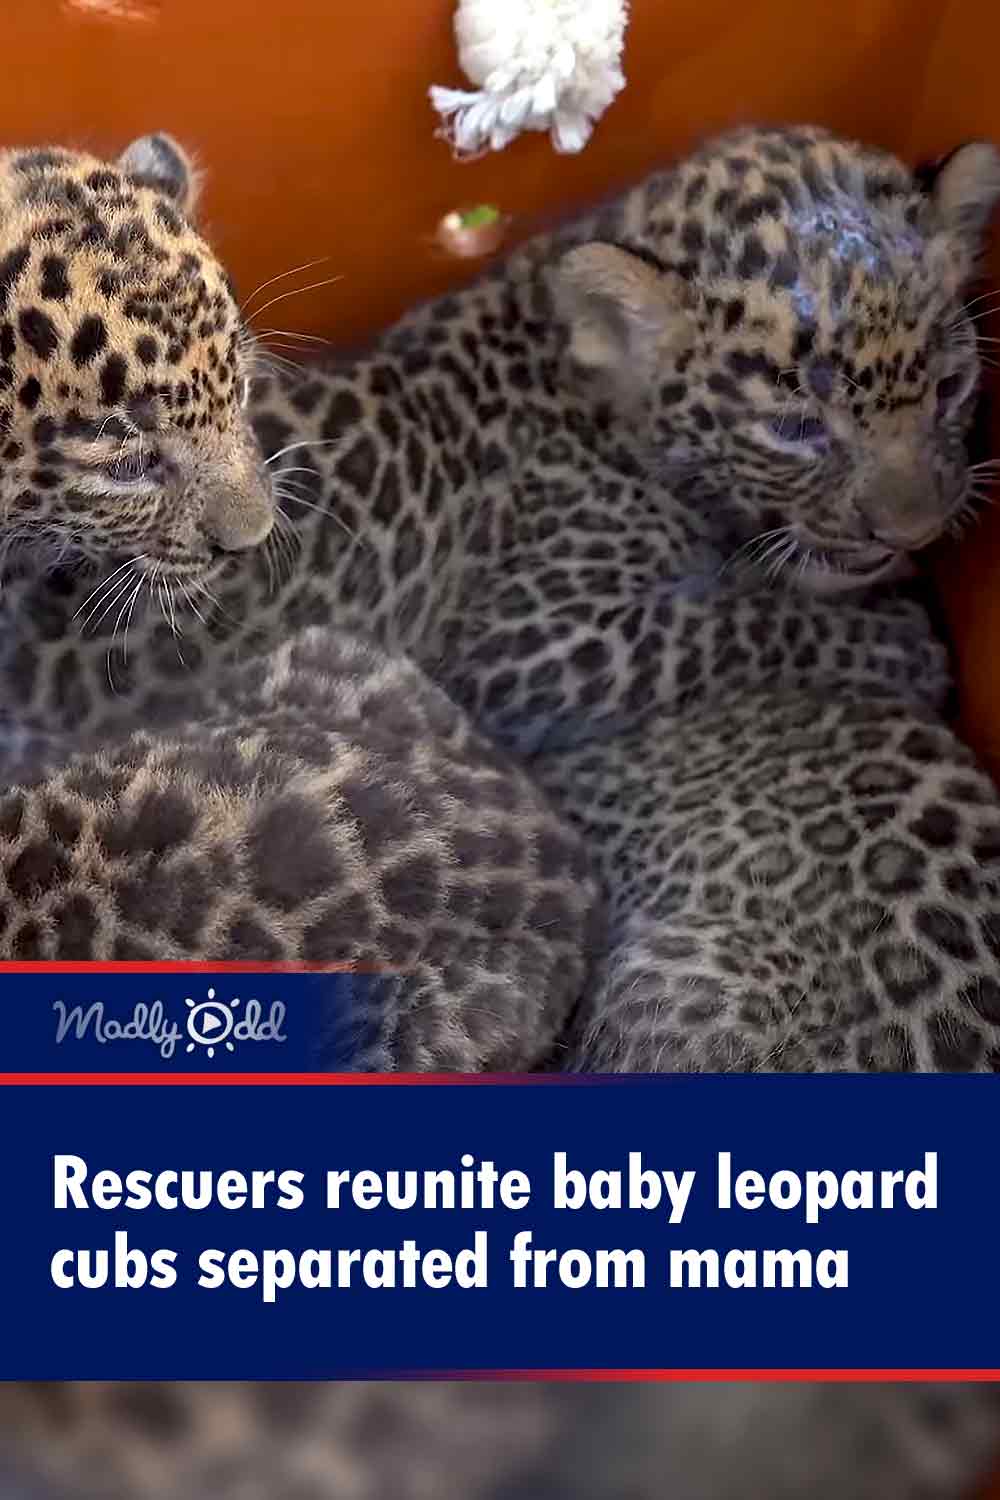 Rescuers reunite baby leopard cubs separated from mama